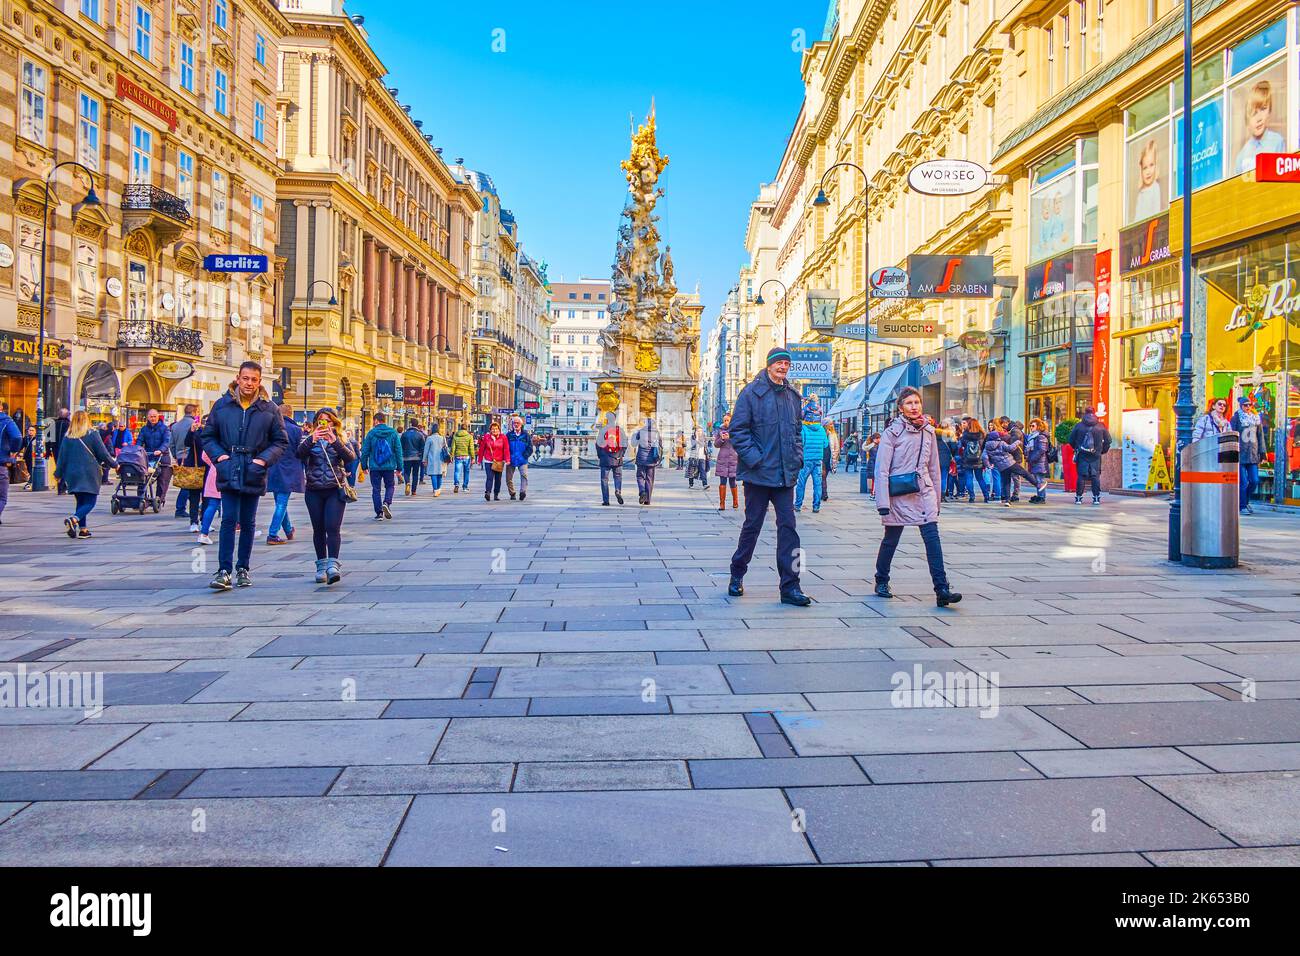 VIENNA, AUSTRIA - FEBRUARY 17, 2019: The central pedestrian Graben street with boutiques and restaurants, on February 17 in Vienna, Austria Stock Photo